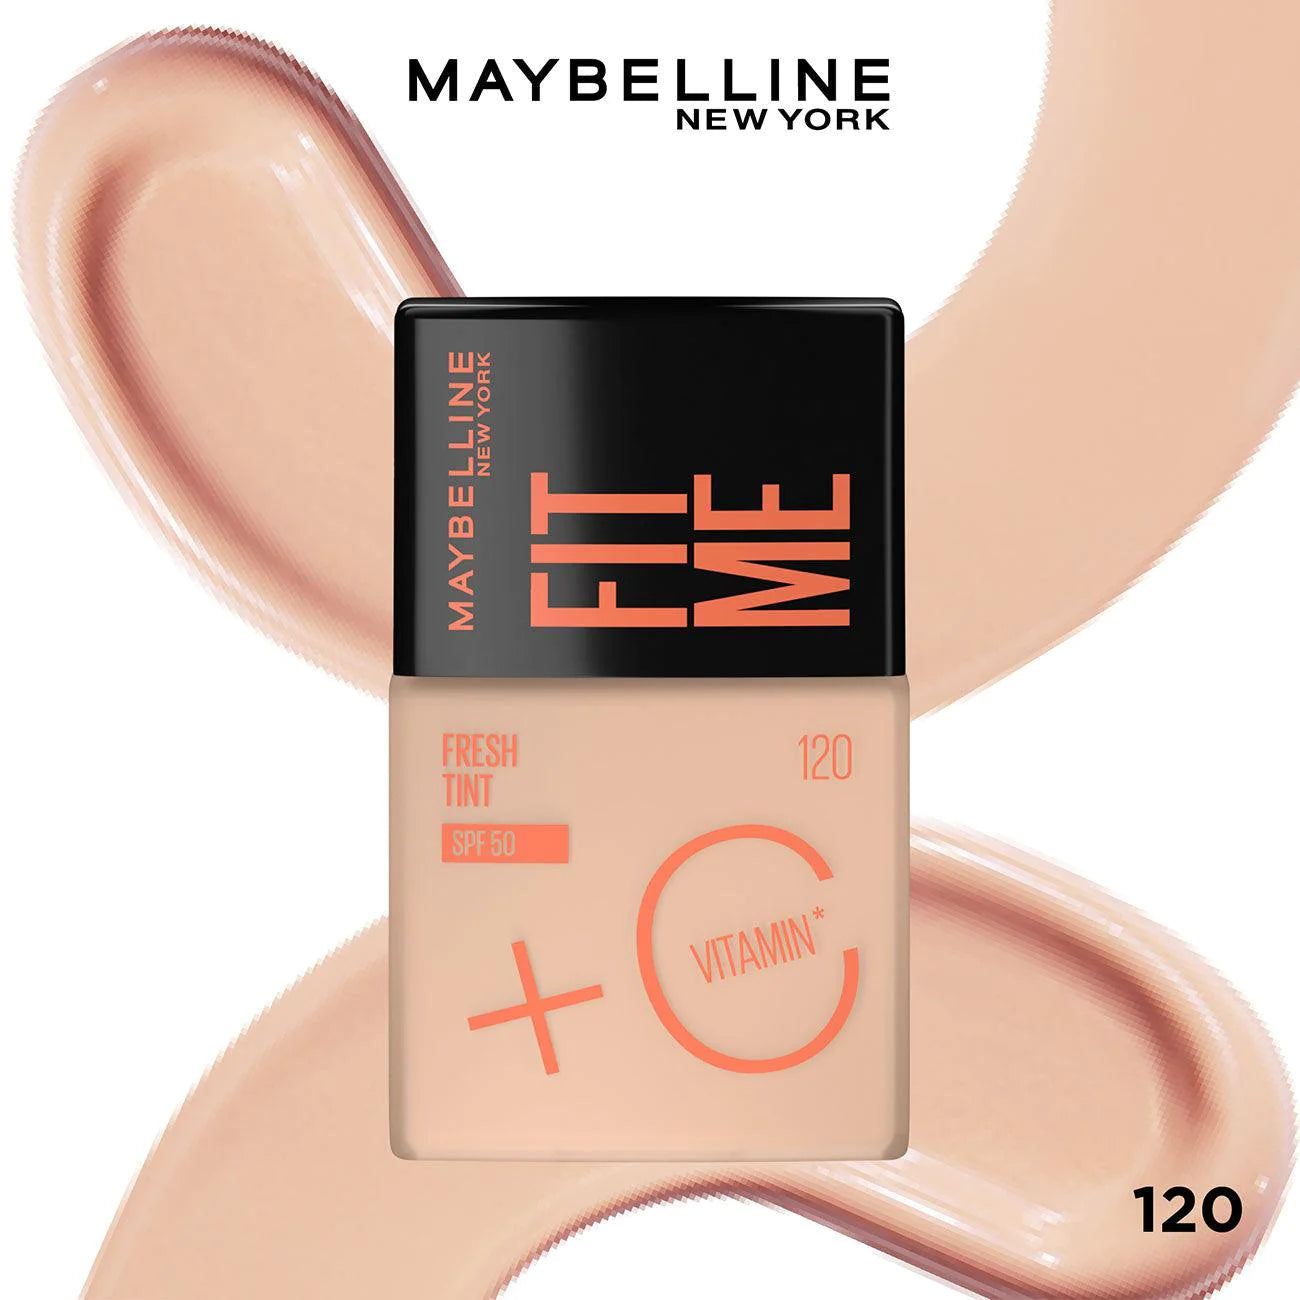 Maybelline New York Fit Me Fresh Tint SPF50